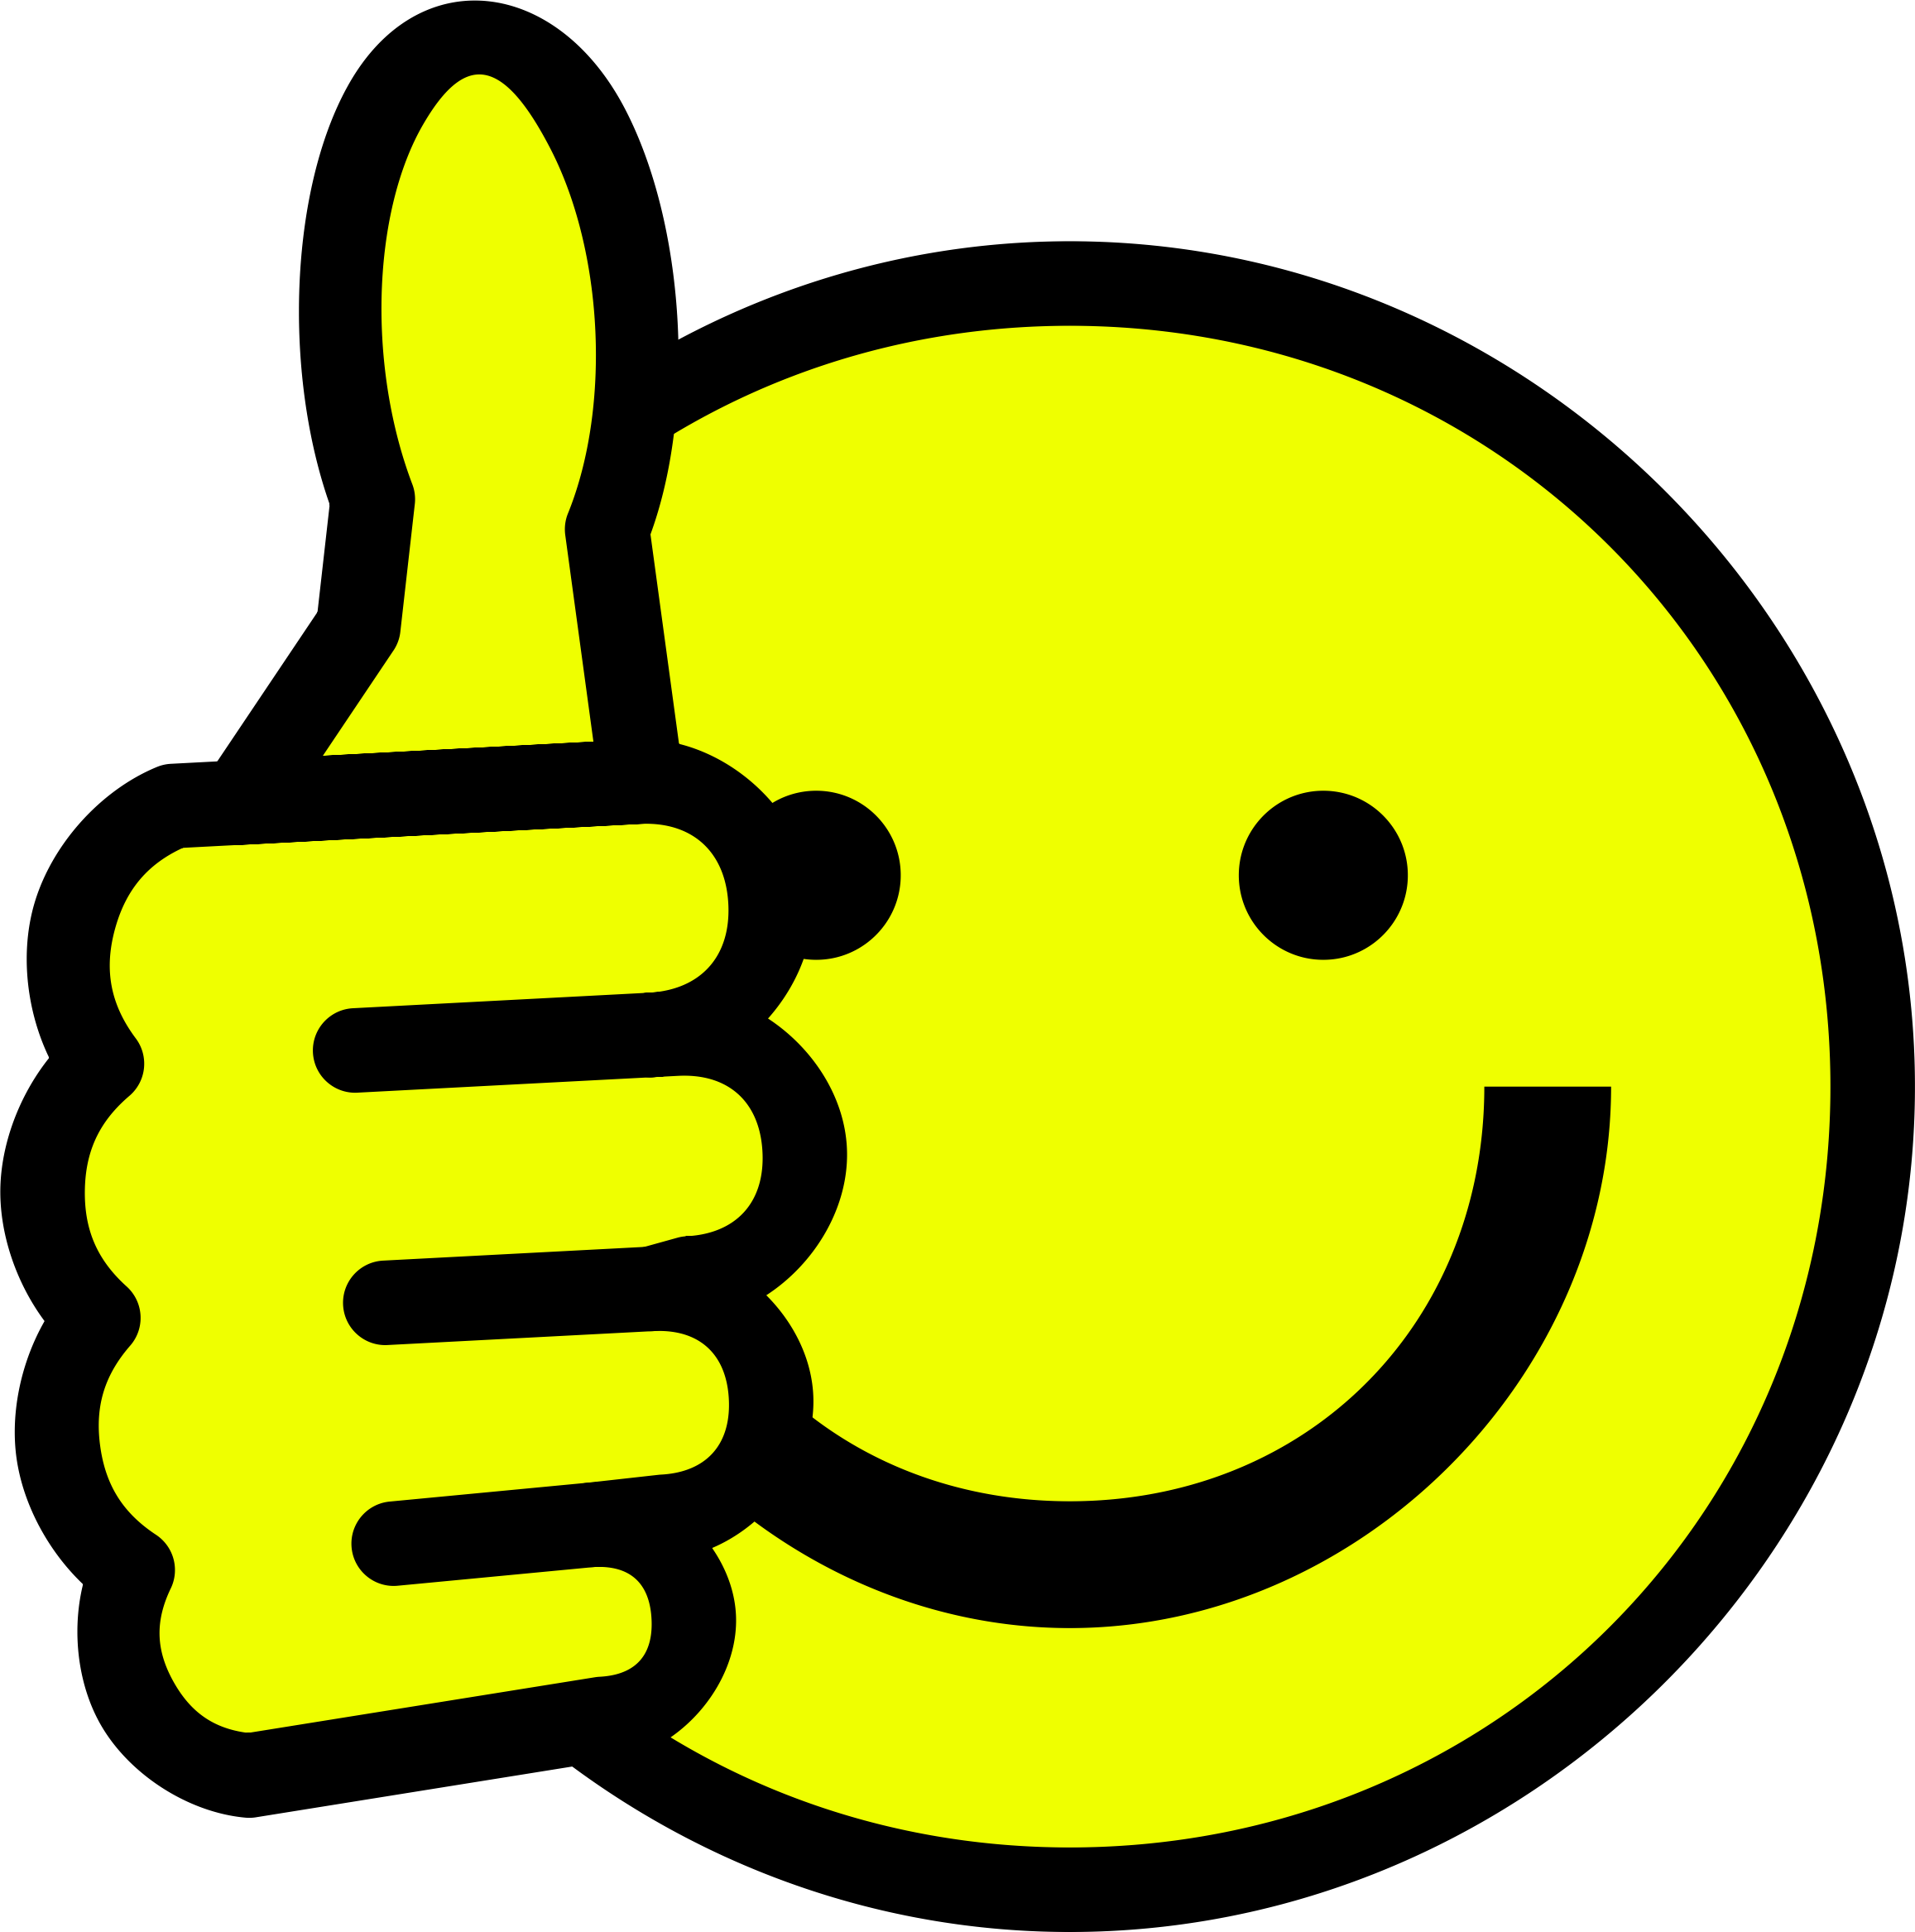 Clipart - Thumbs up smiley